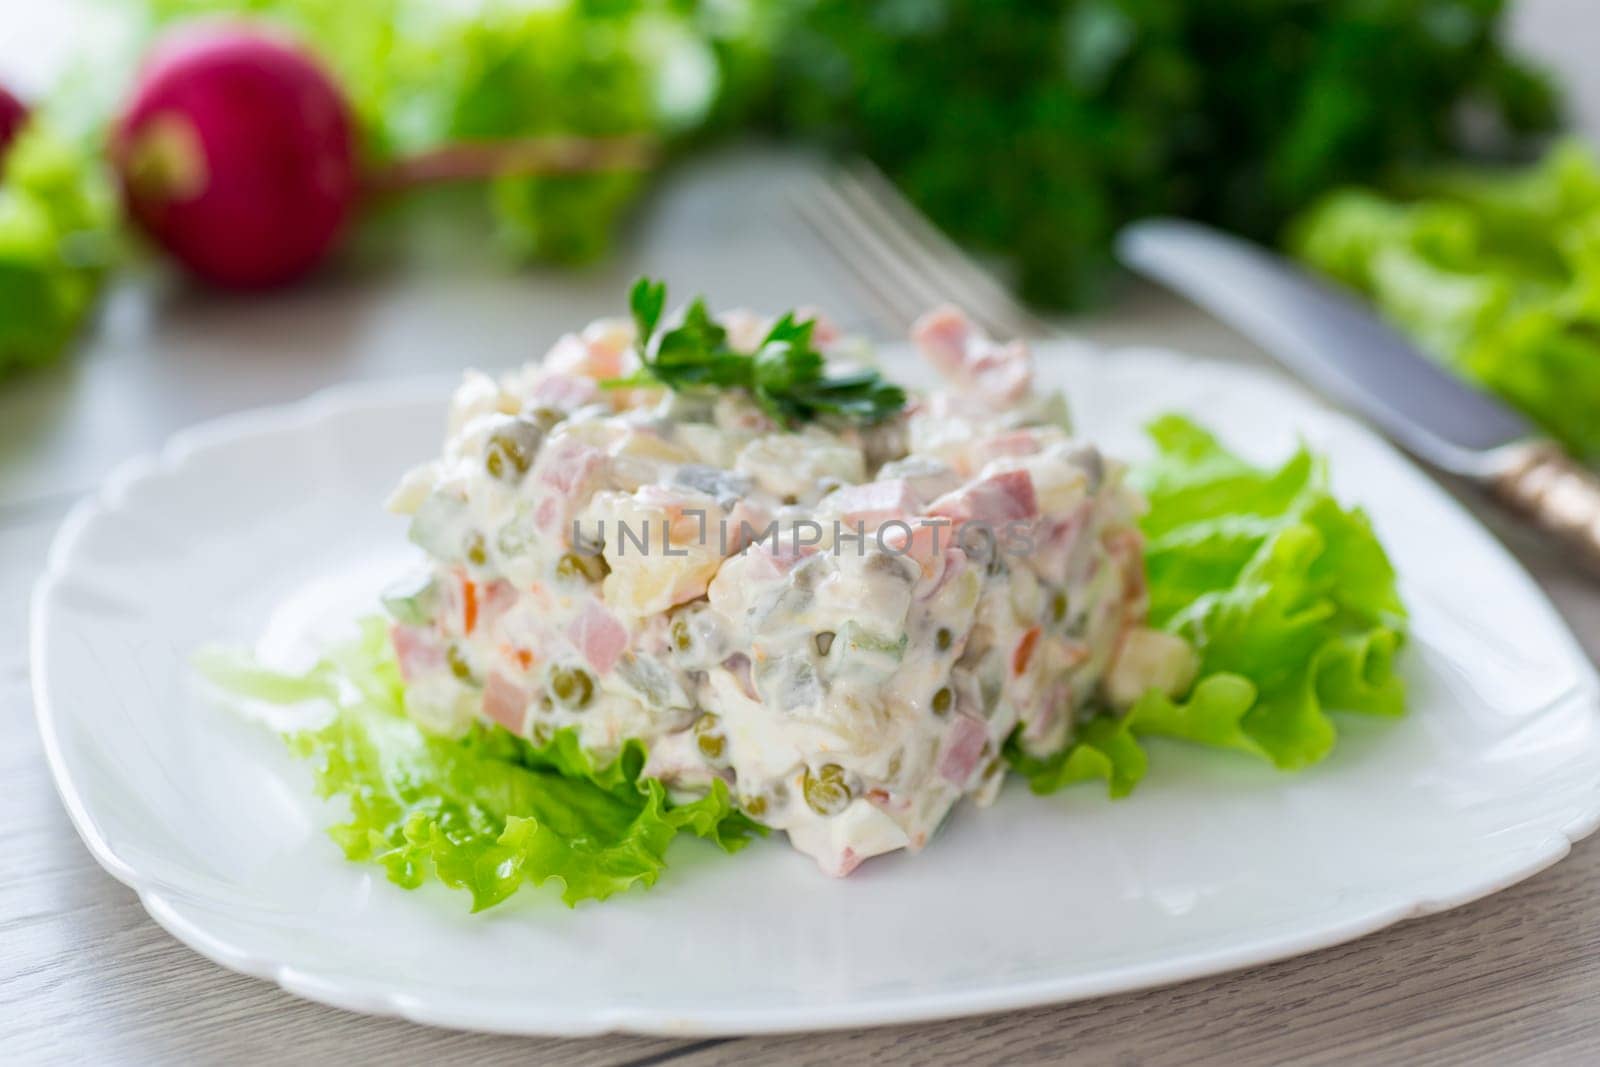 vegetable salad with boiled vegetables and dressed with mayonnaise by Rawlik